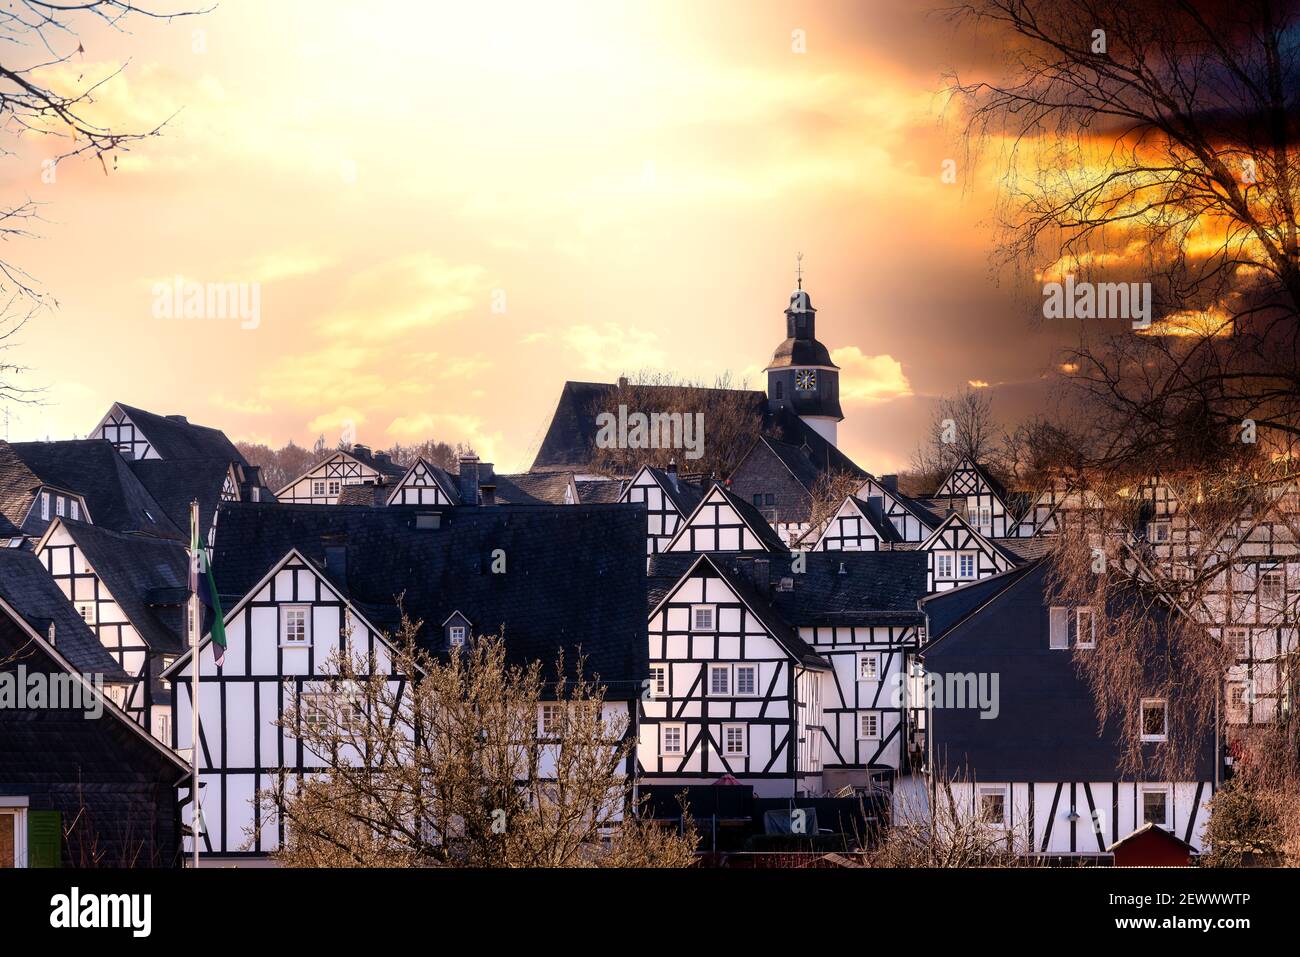 Historic core of Freudenberg with beautiful half-timbered houses in Siegerland, Germany Stock Photo